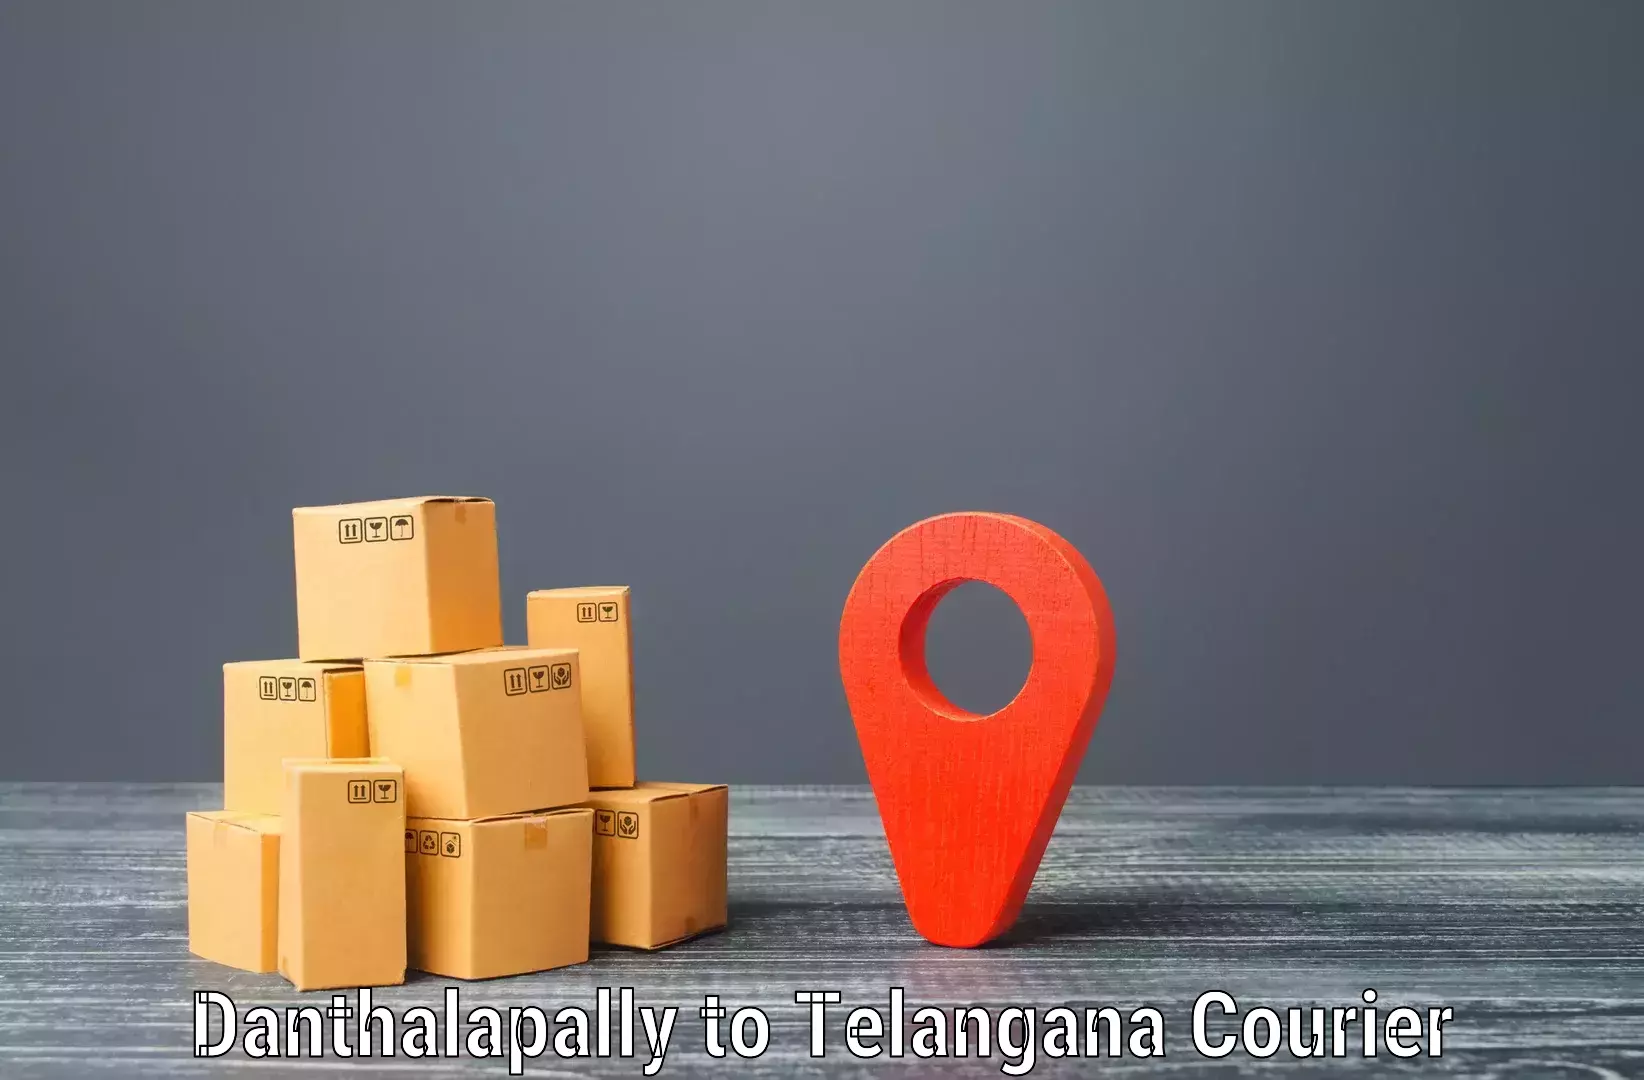 Reliable shipping partners Danthalapally to Hyderabad